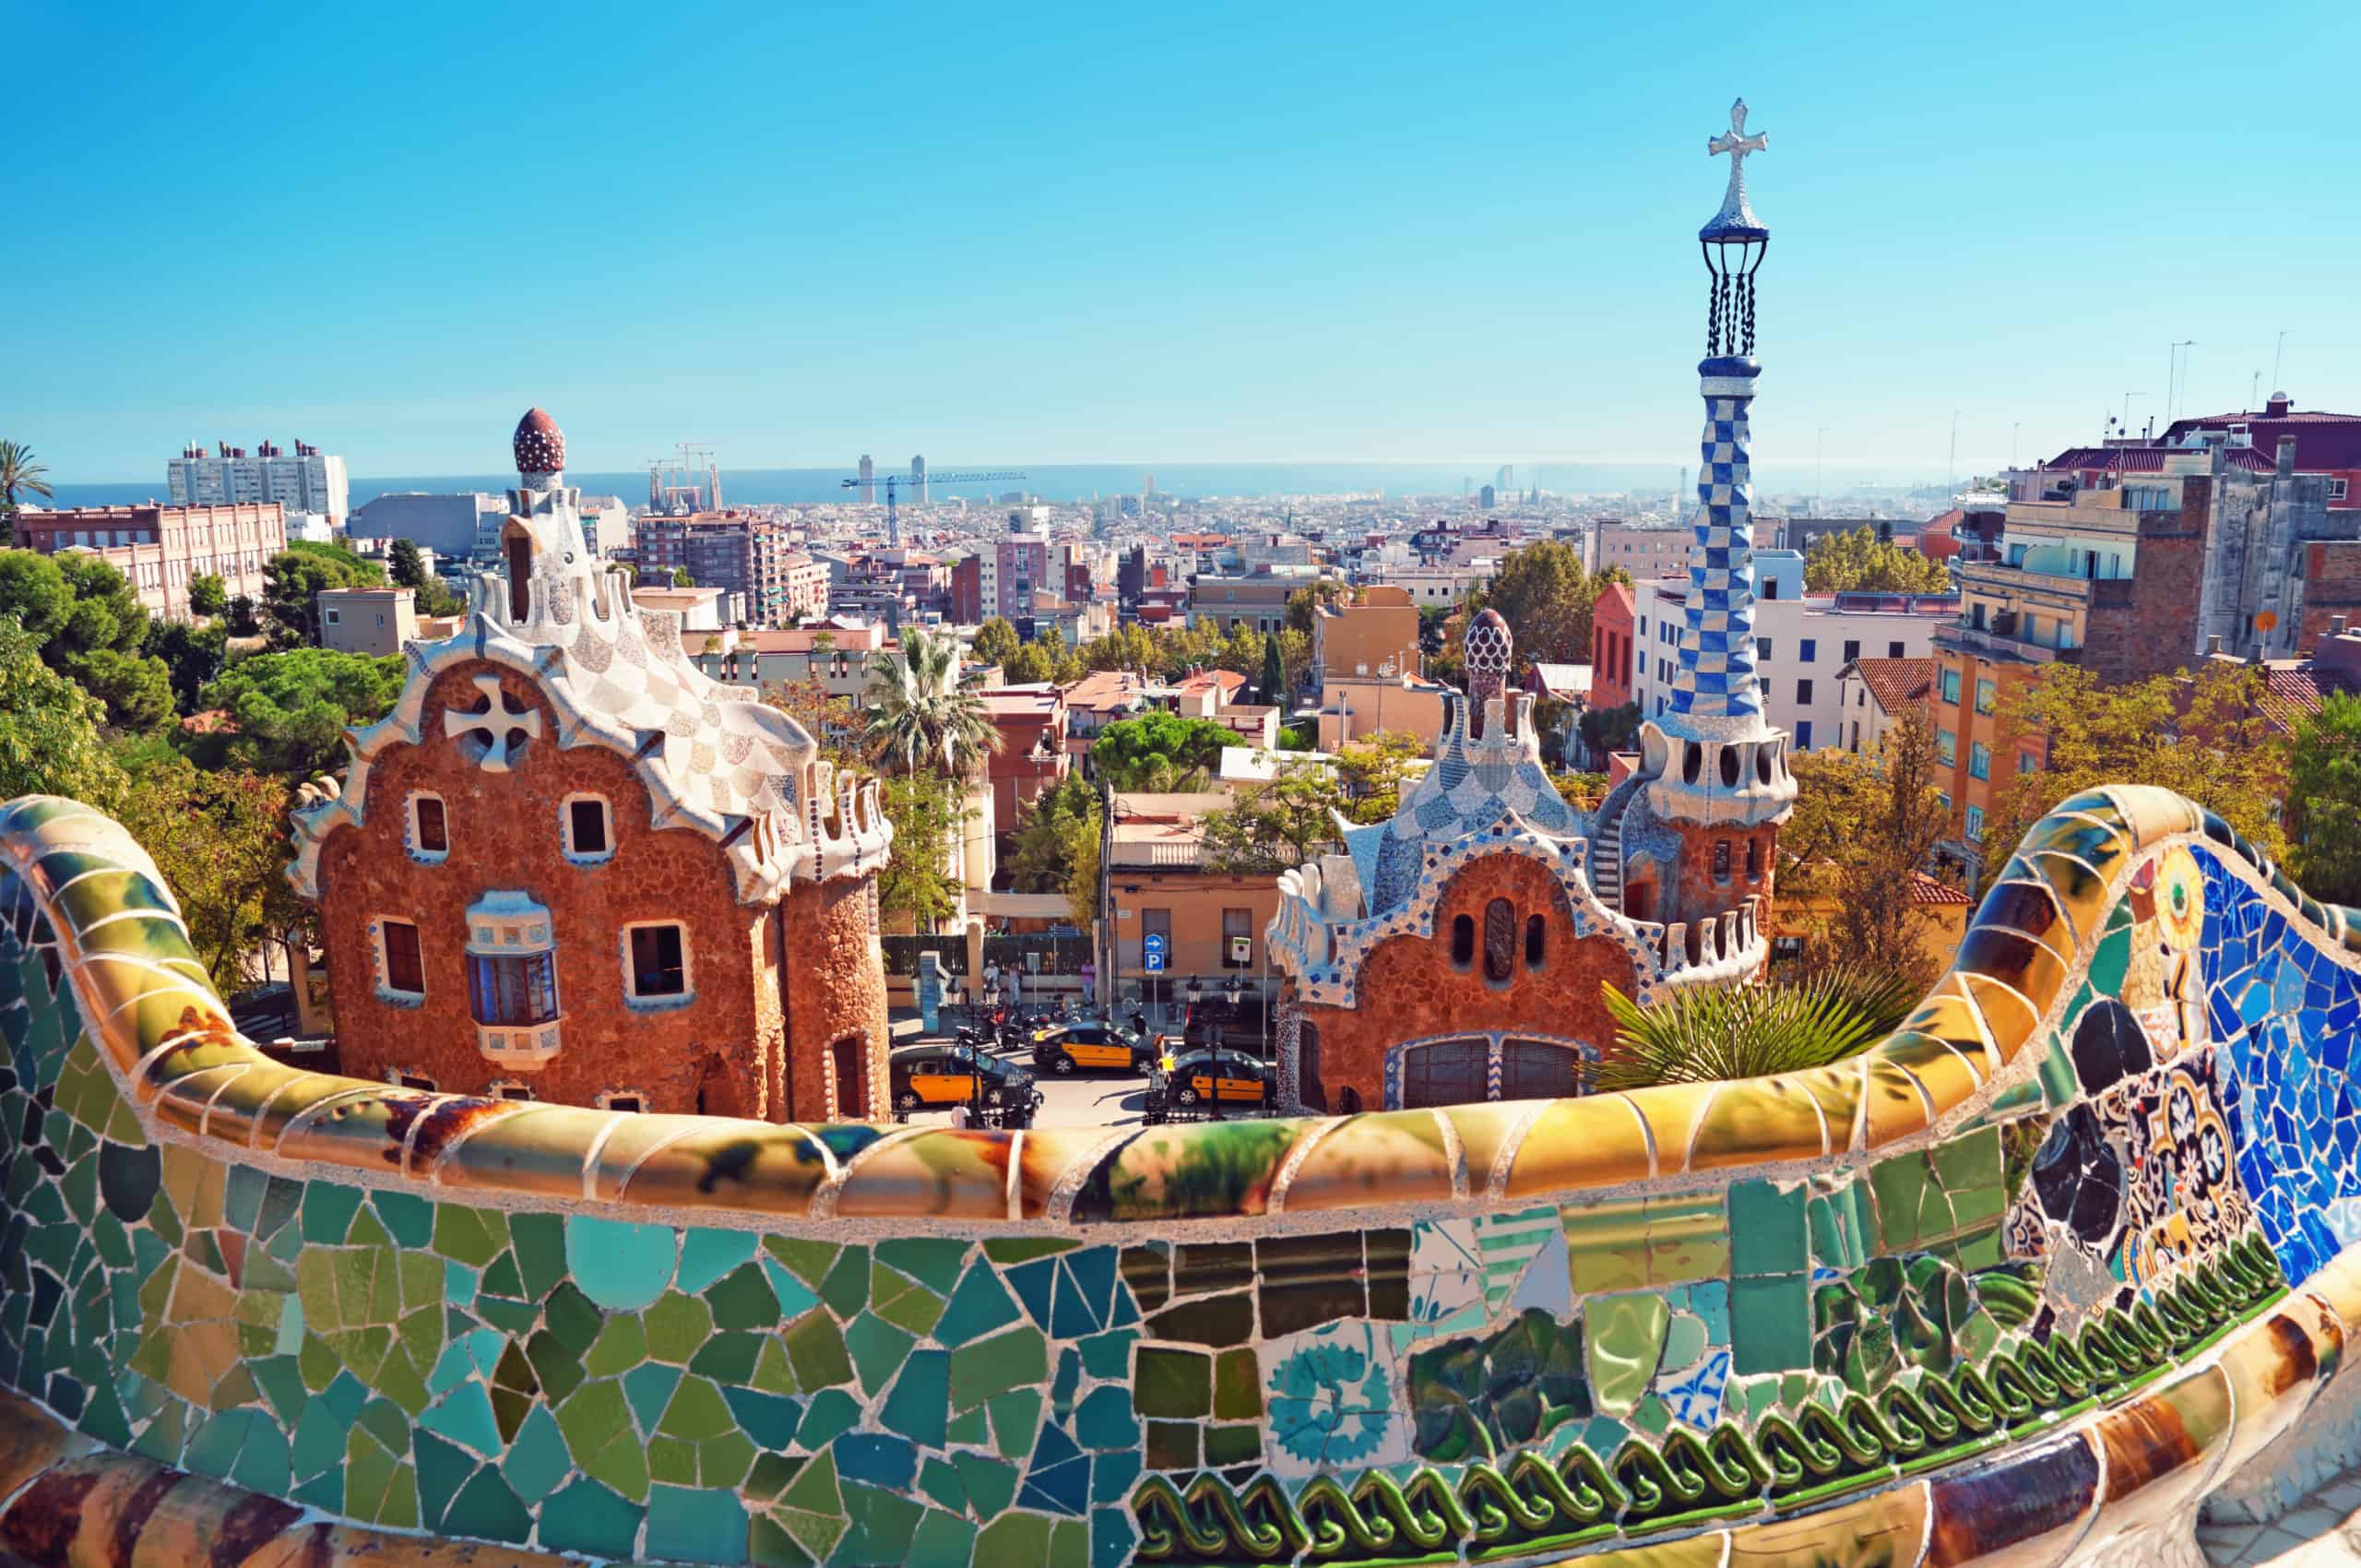 If you are looking to travel to spain for the first time, one of the most unique places to see is Barcelona